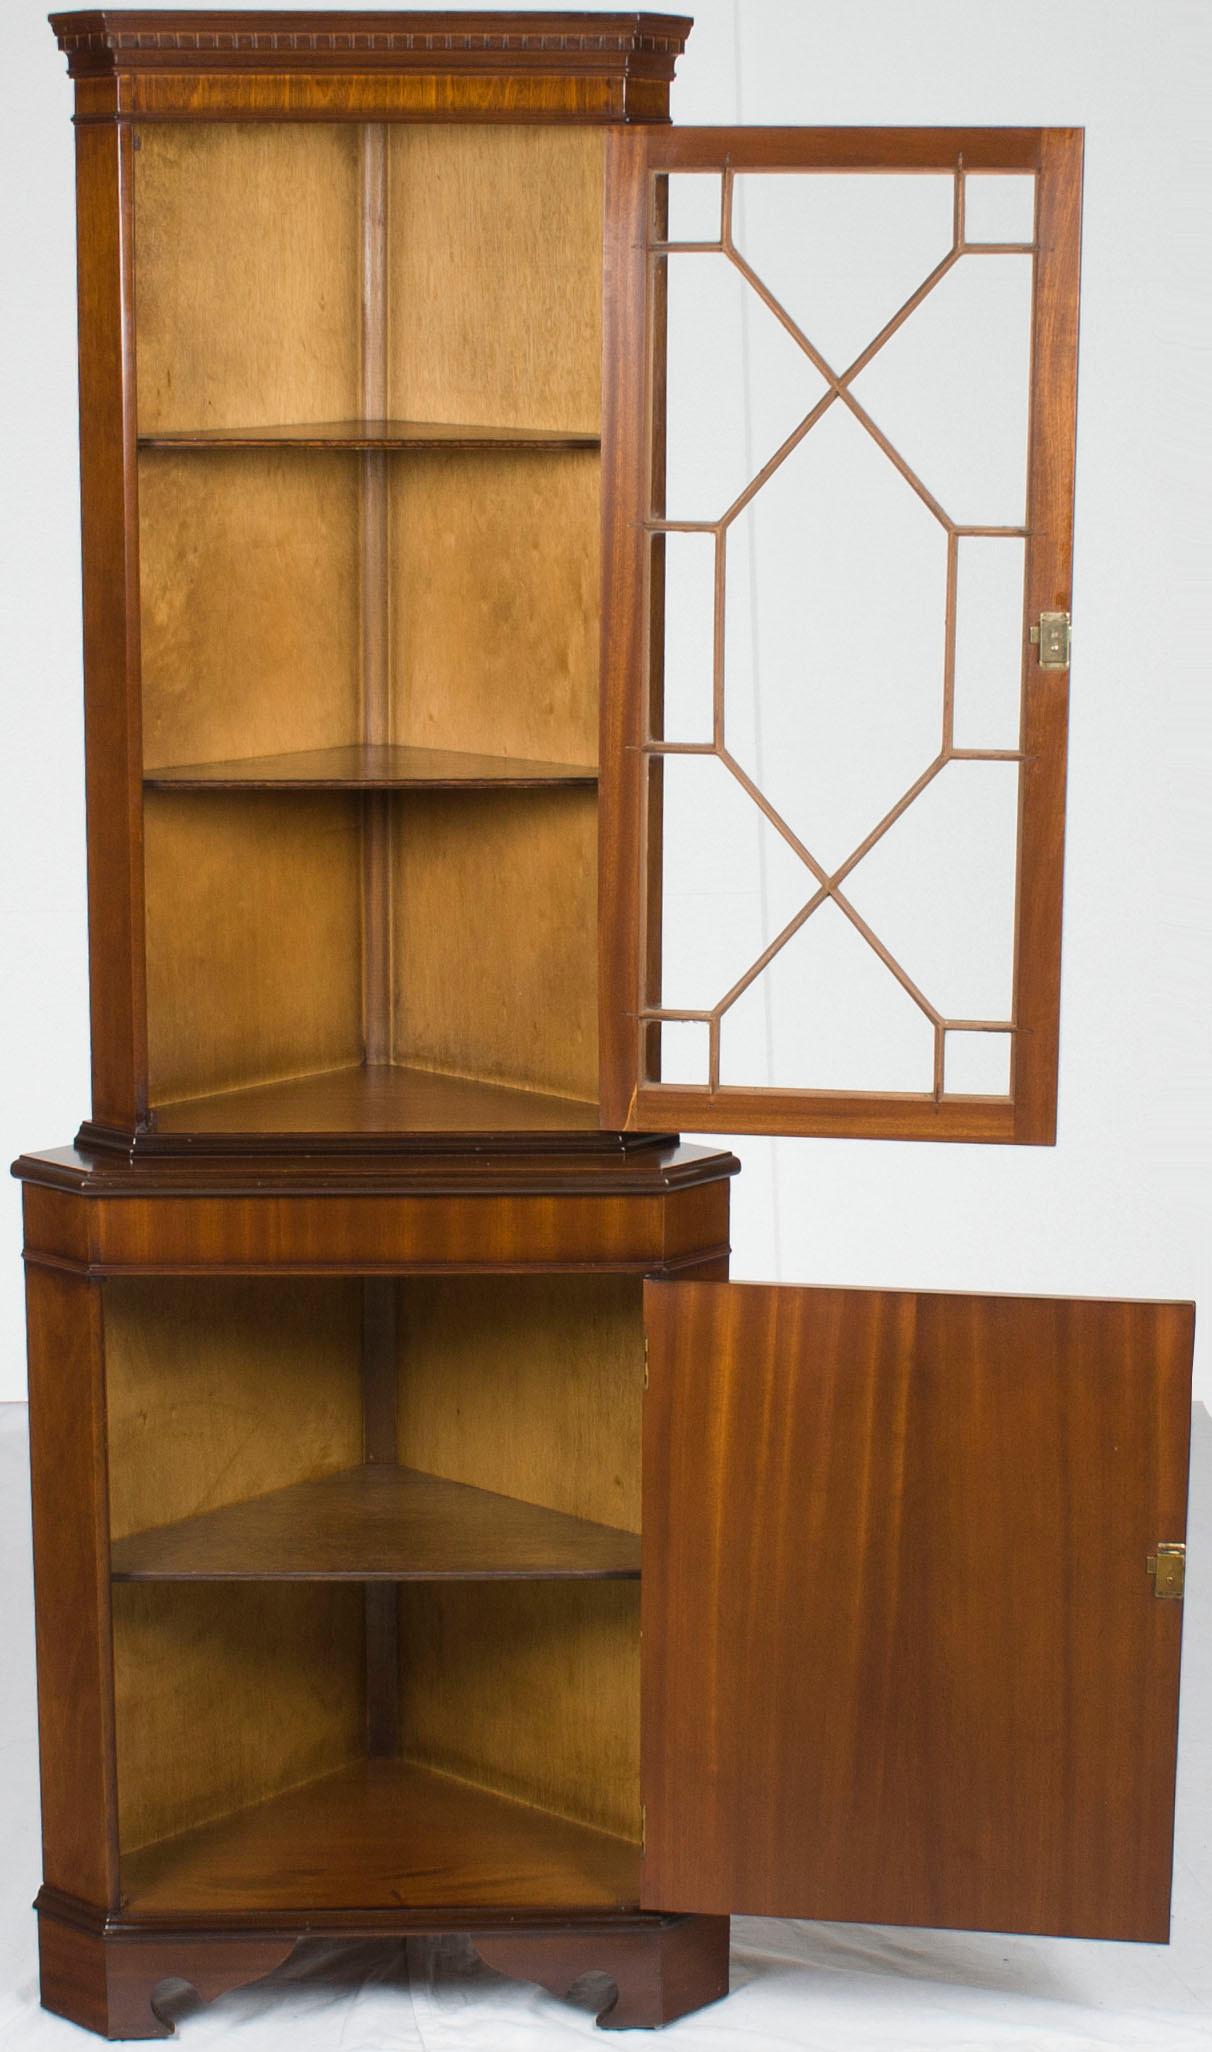 This antique style mahogany corner cabinet was crafted in England around 1960. Today, the mahogany retains a gorgeous complexion and a striking grain, particularly on the lower cabinet door. Both cabinet doors operate with an accompanying key, while